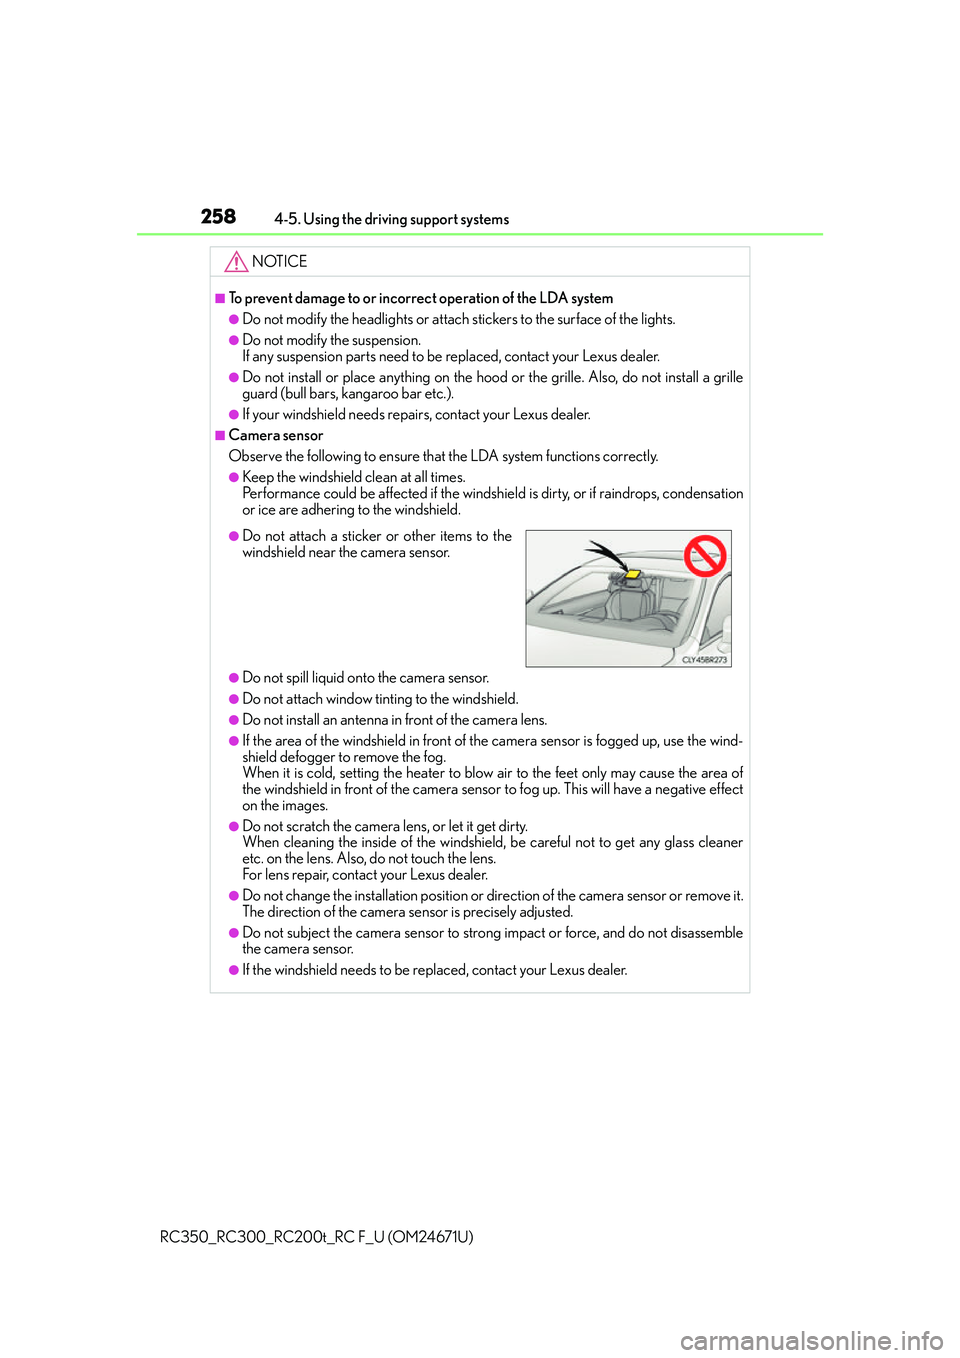 LEXUS RC350 2016  Owners Manual 2584-5. Using the driving support systems
RC350_RC300_RC200t_RC F_U (OM24671U)
NOTICE
■To prevent damage to or incorrect operation of the LDA system
●Do not modify the headlights or attach sticker